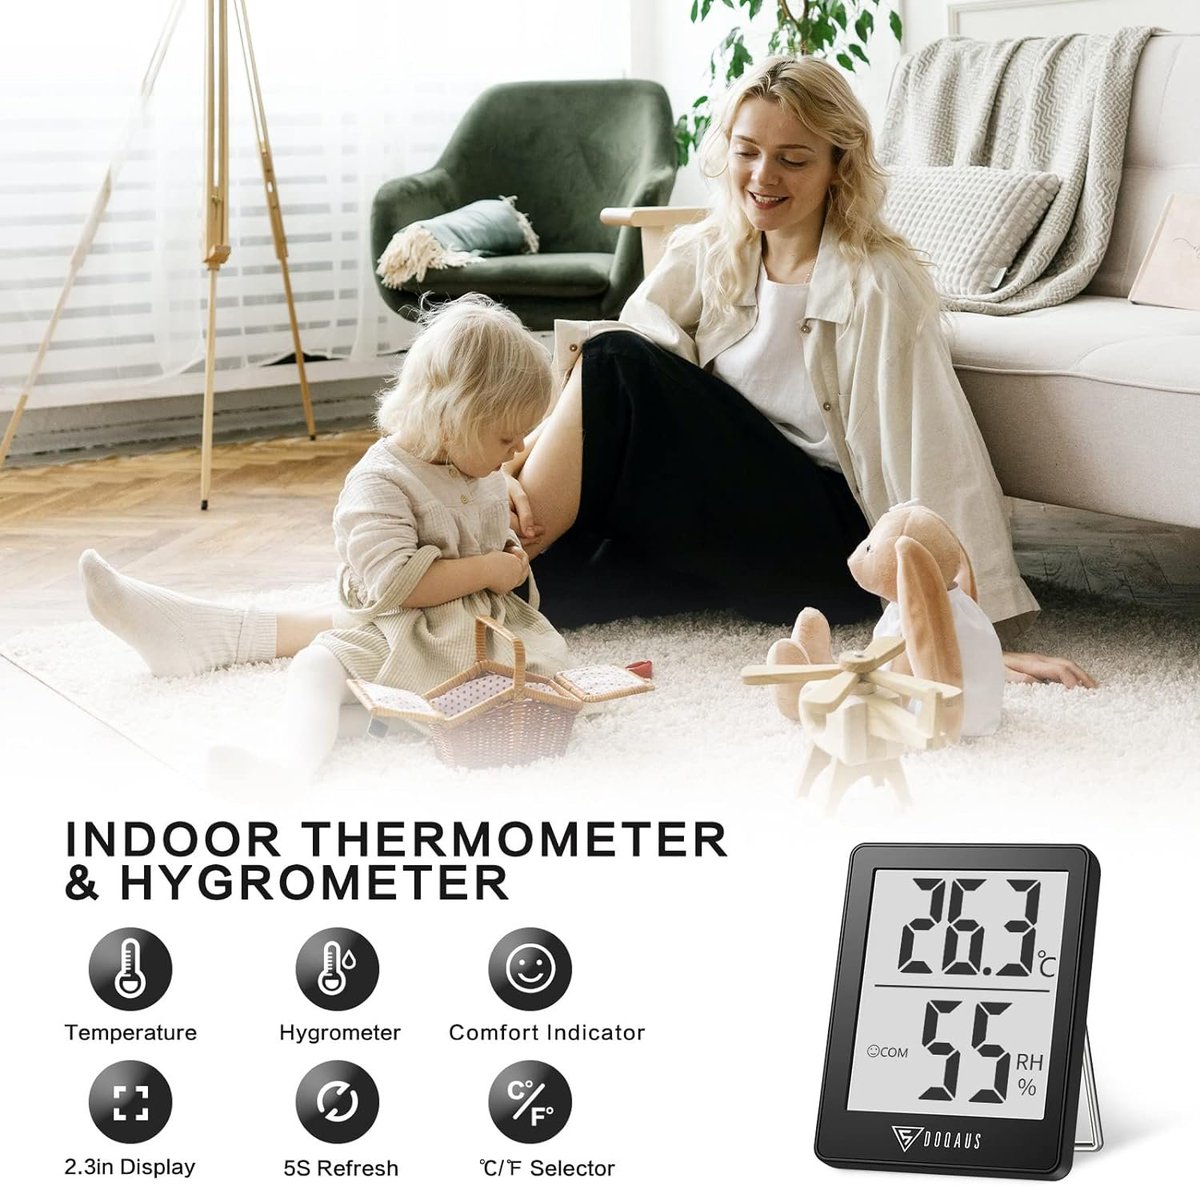 🌡️ DOQAUS Digital Room Thermometer now just £3.19 (was £3.99) on Amazon: stock-checker.com/deals/doqaus-d…